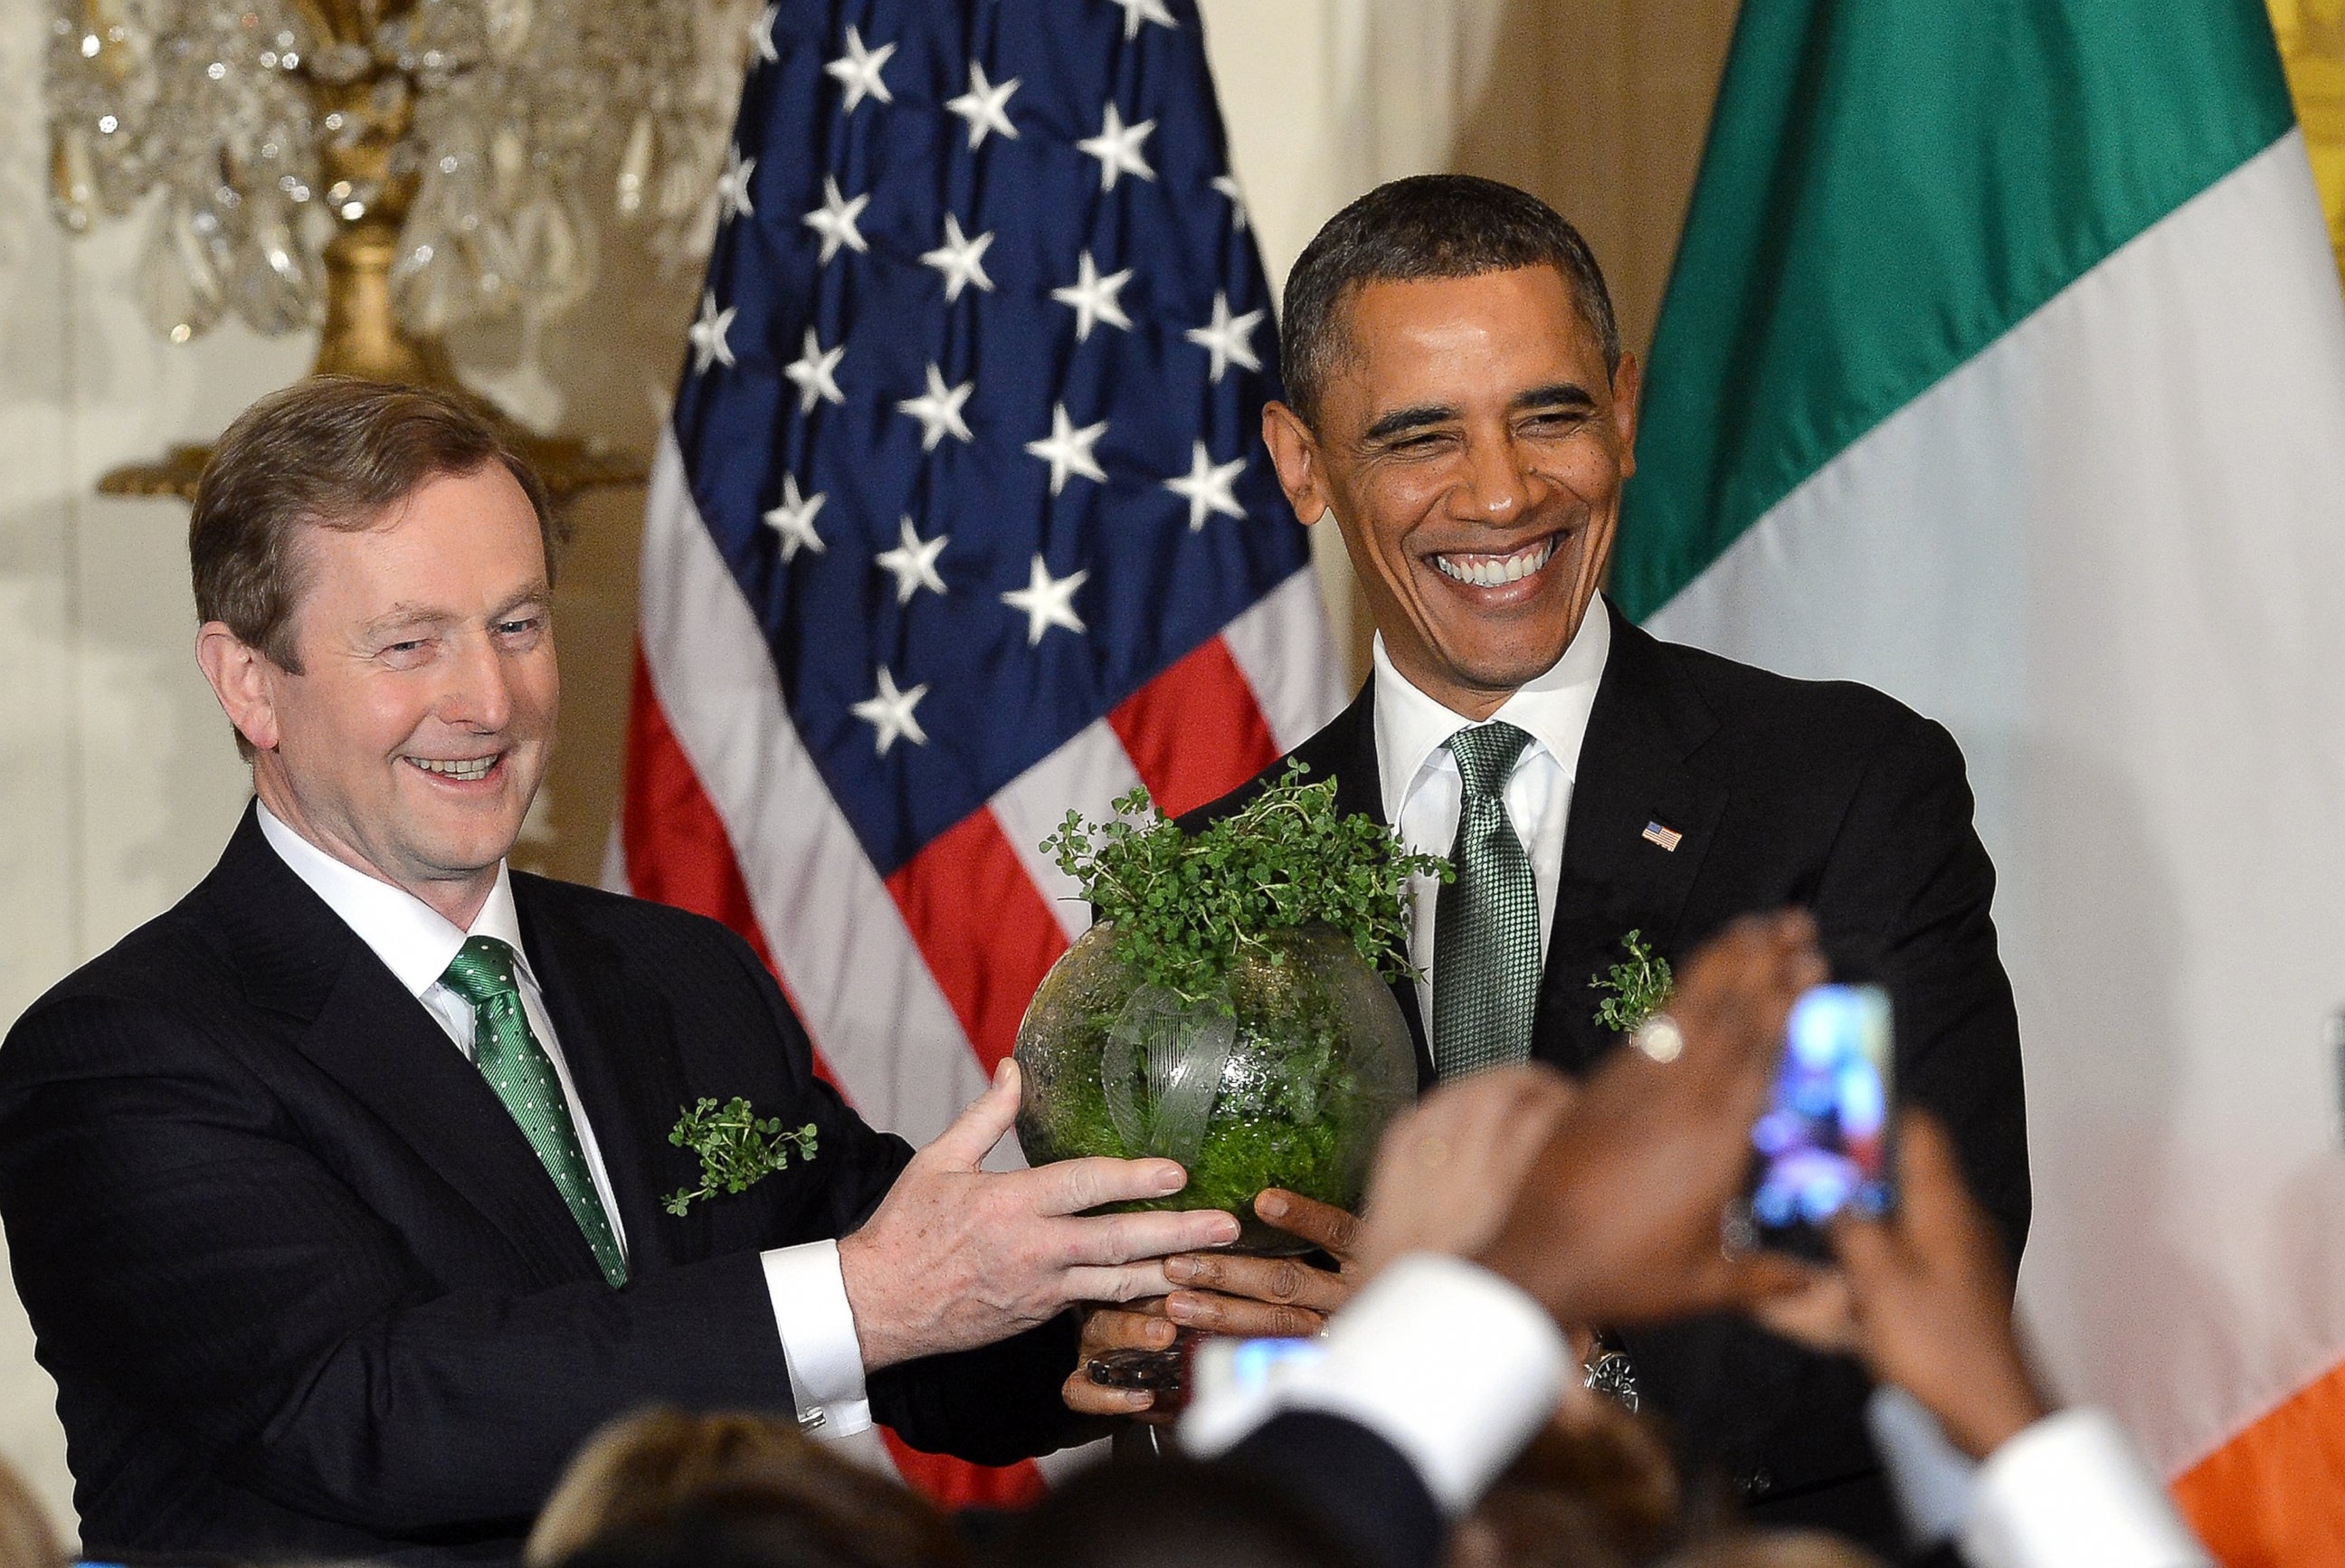 PHOTO: Irish Prime Minister Enda Kenny presents  a bowl of shamrock to President Barack during a St. Patrick's Day reception in the East Room at the White House in Washington, March 19, 2013.